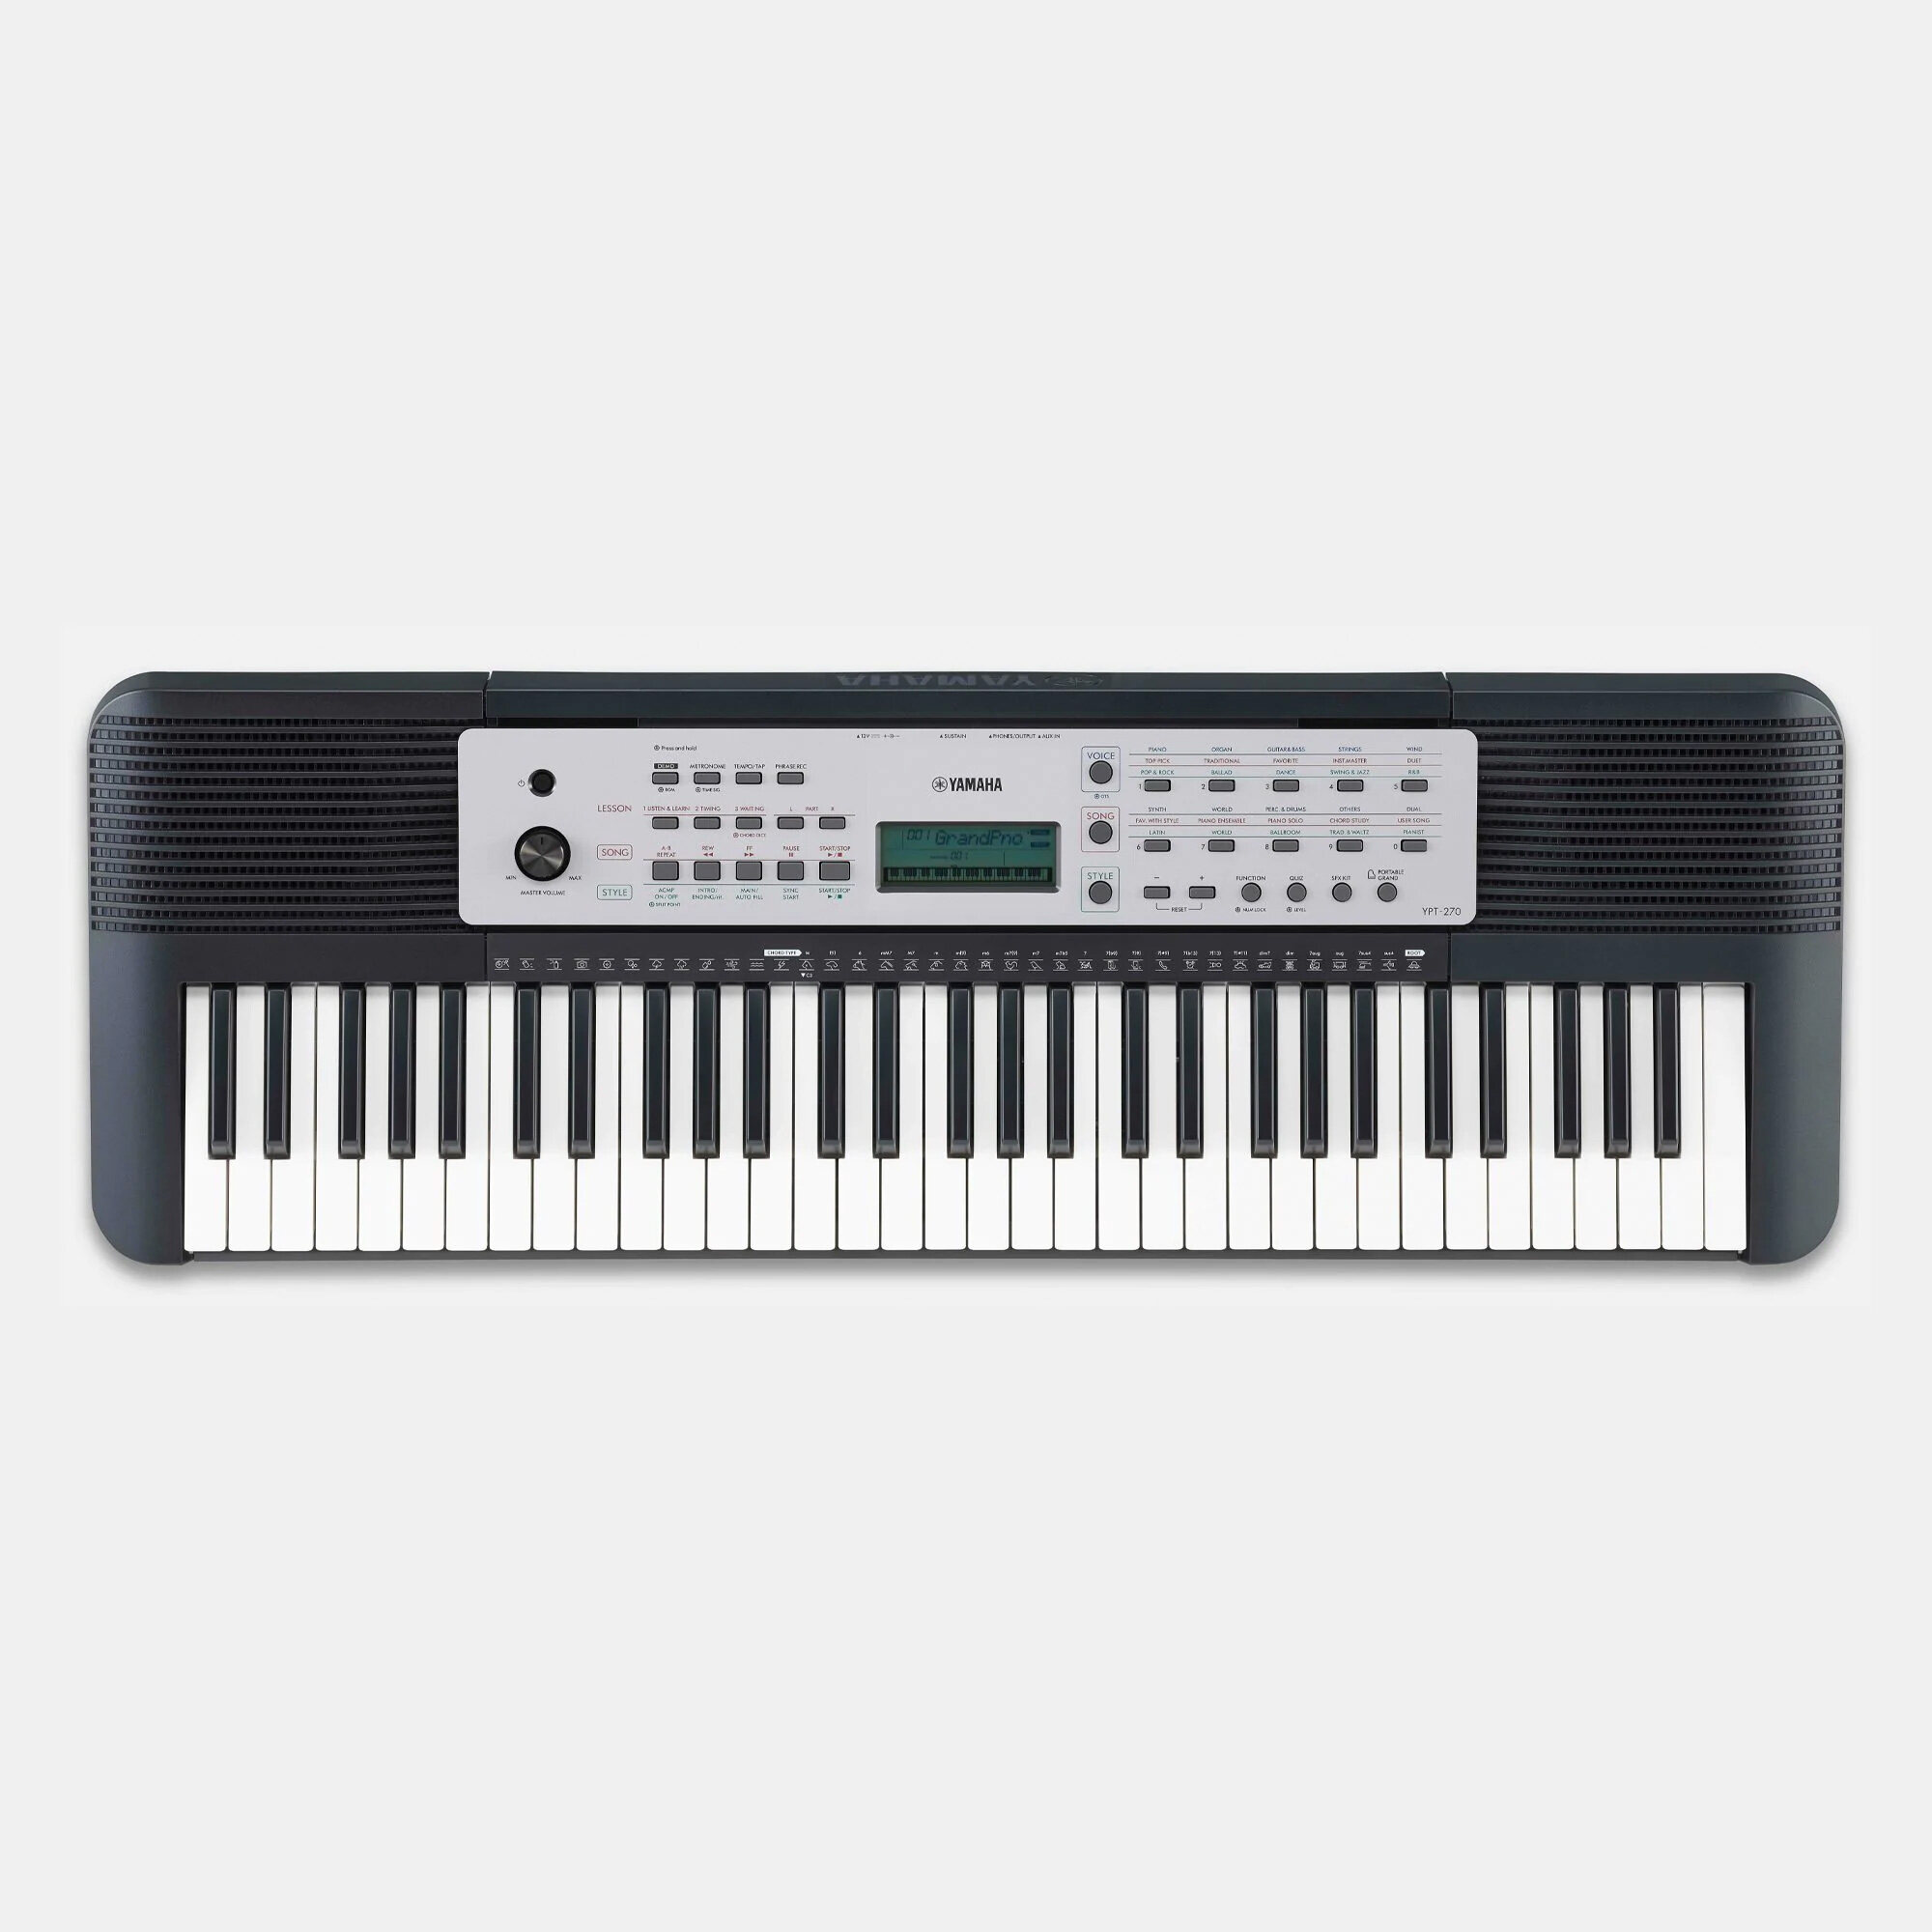 61 key entry-level electronic organ with rich sound and functions built-in